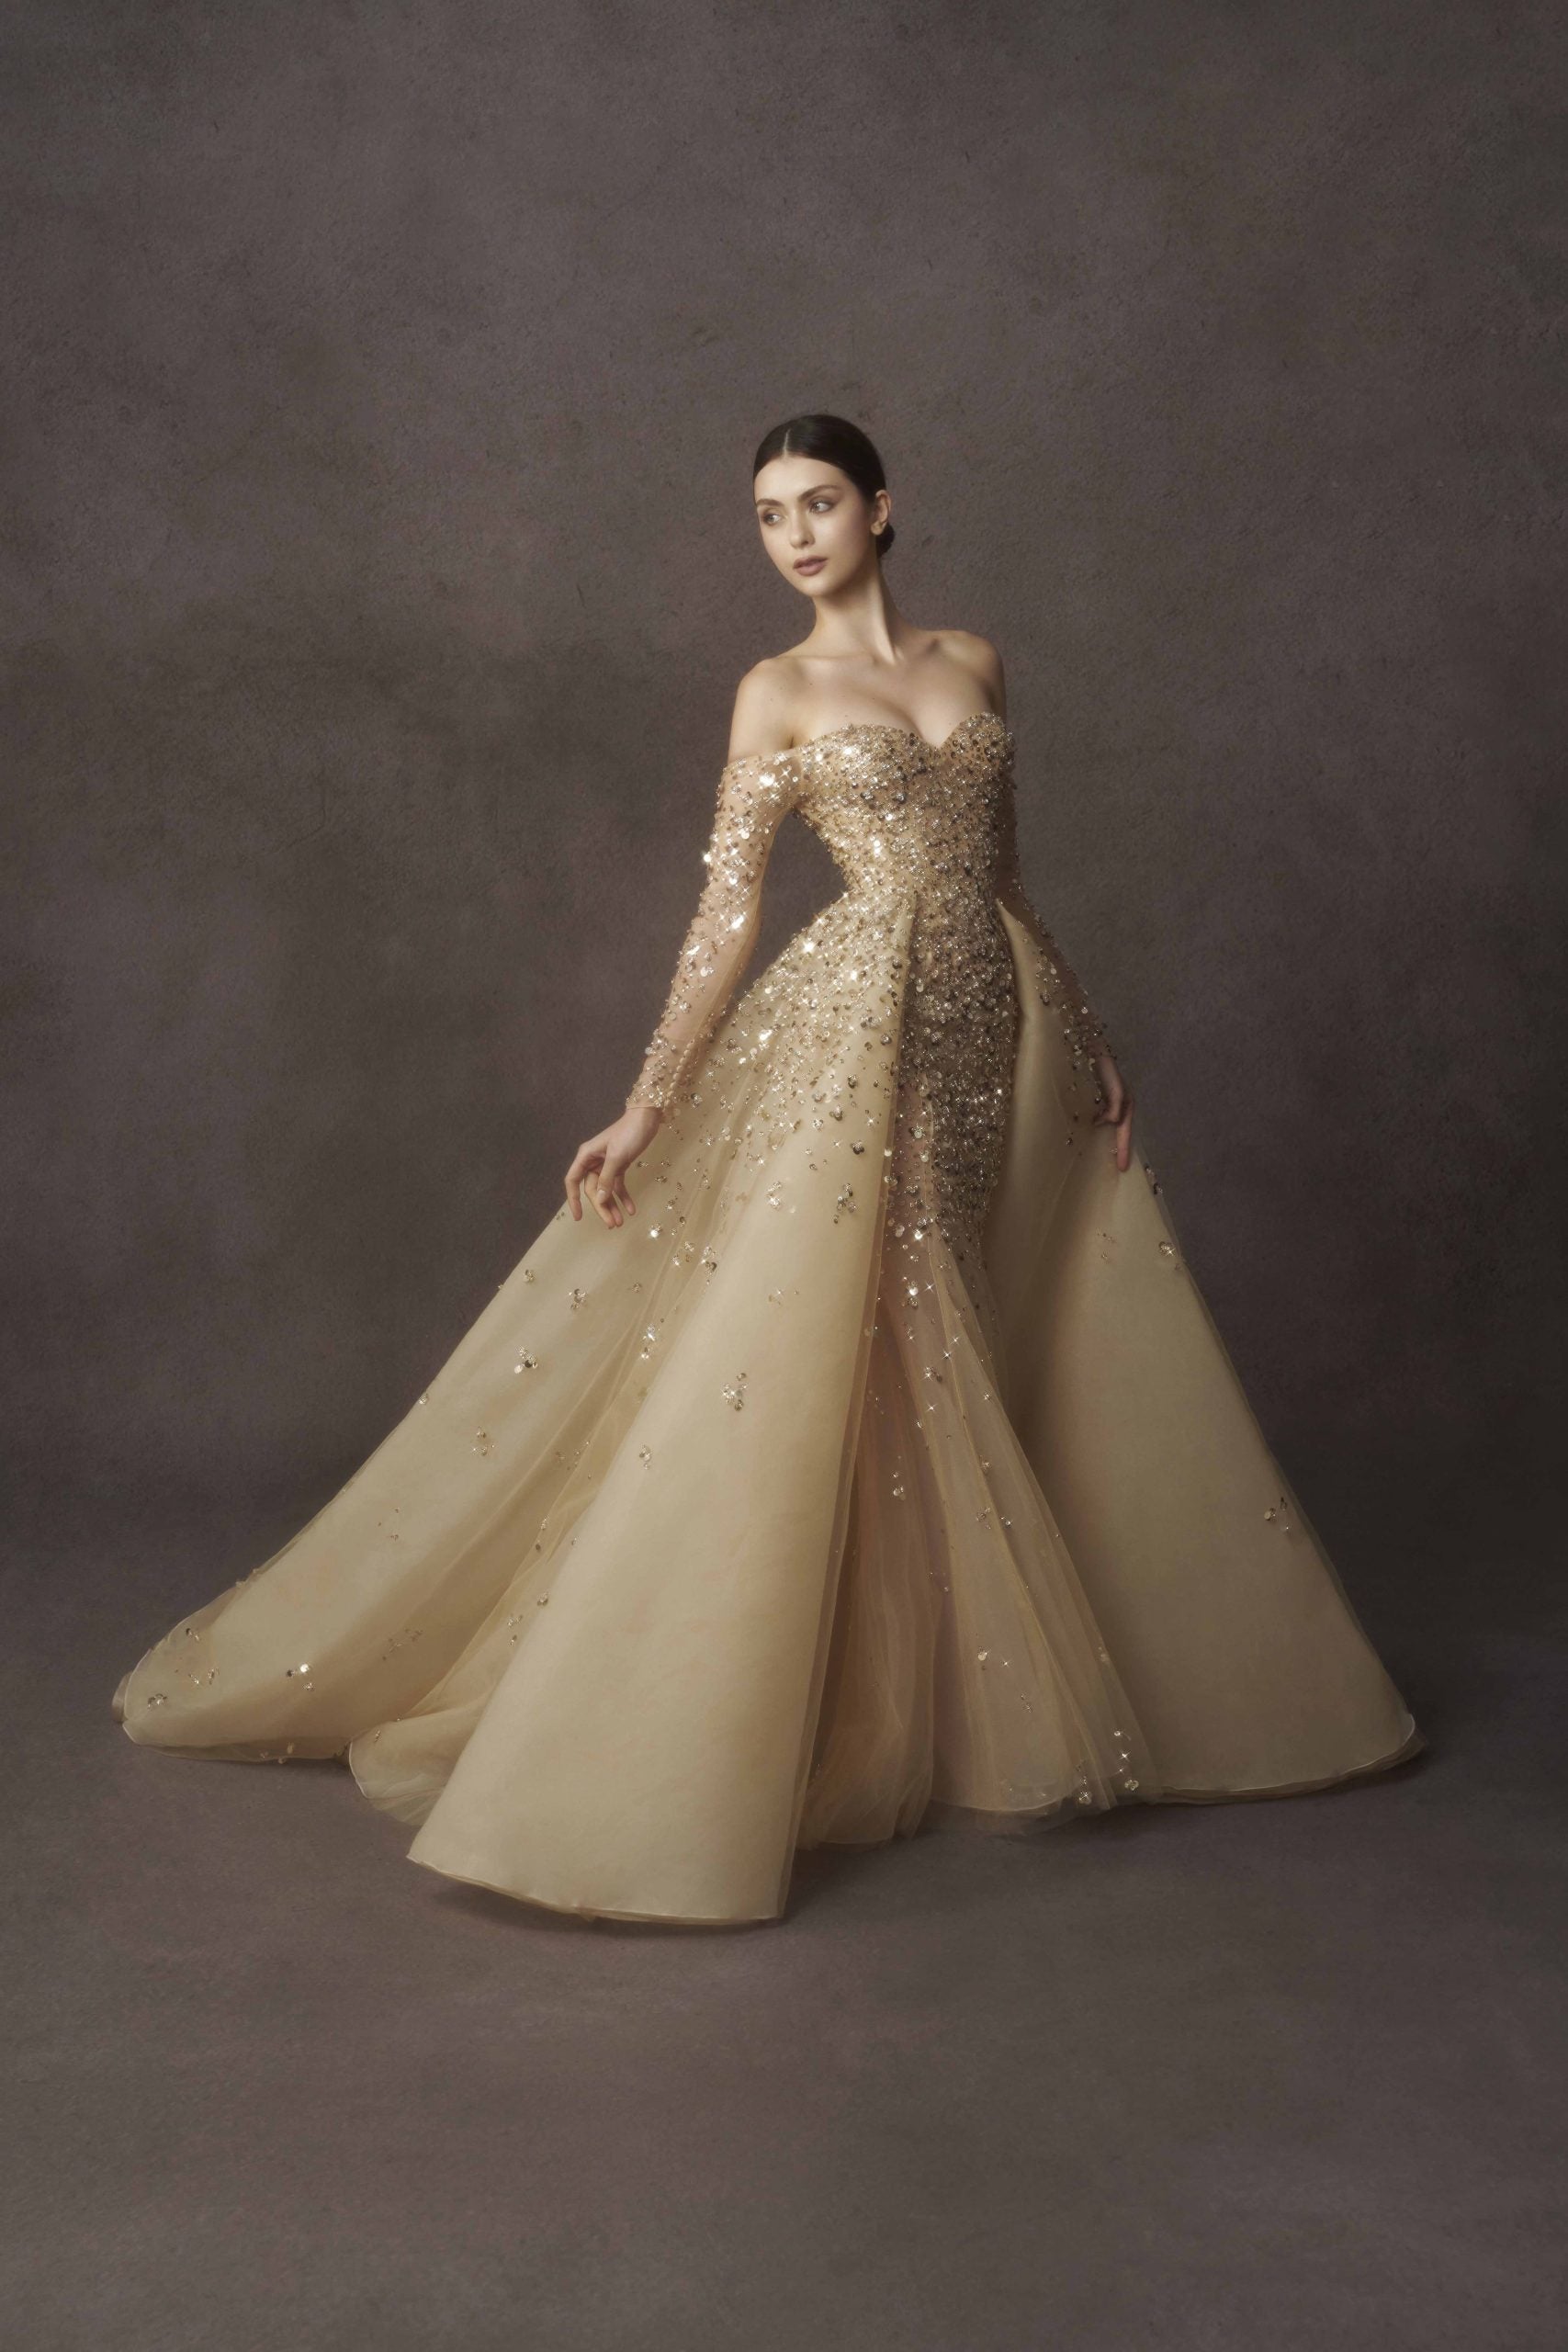 Long Sleeve Embellished Mermaid Gown With Detchable Matching Train by Nicole + Felicia - Image 2